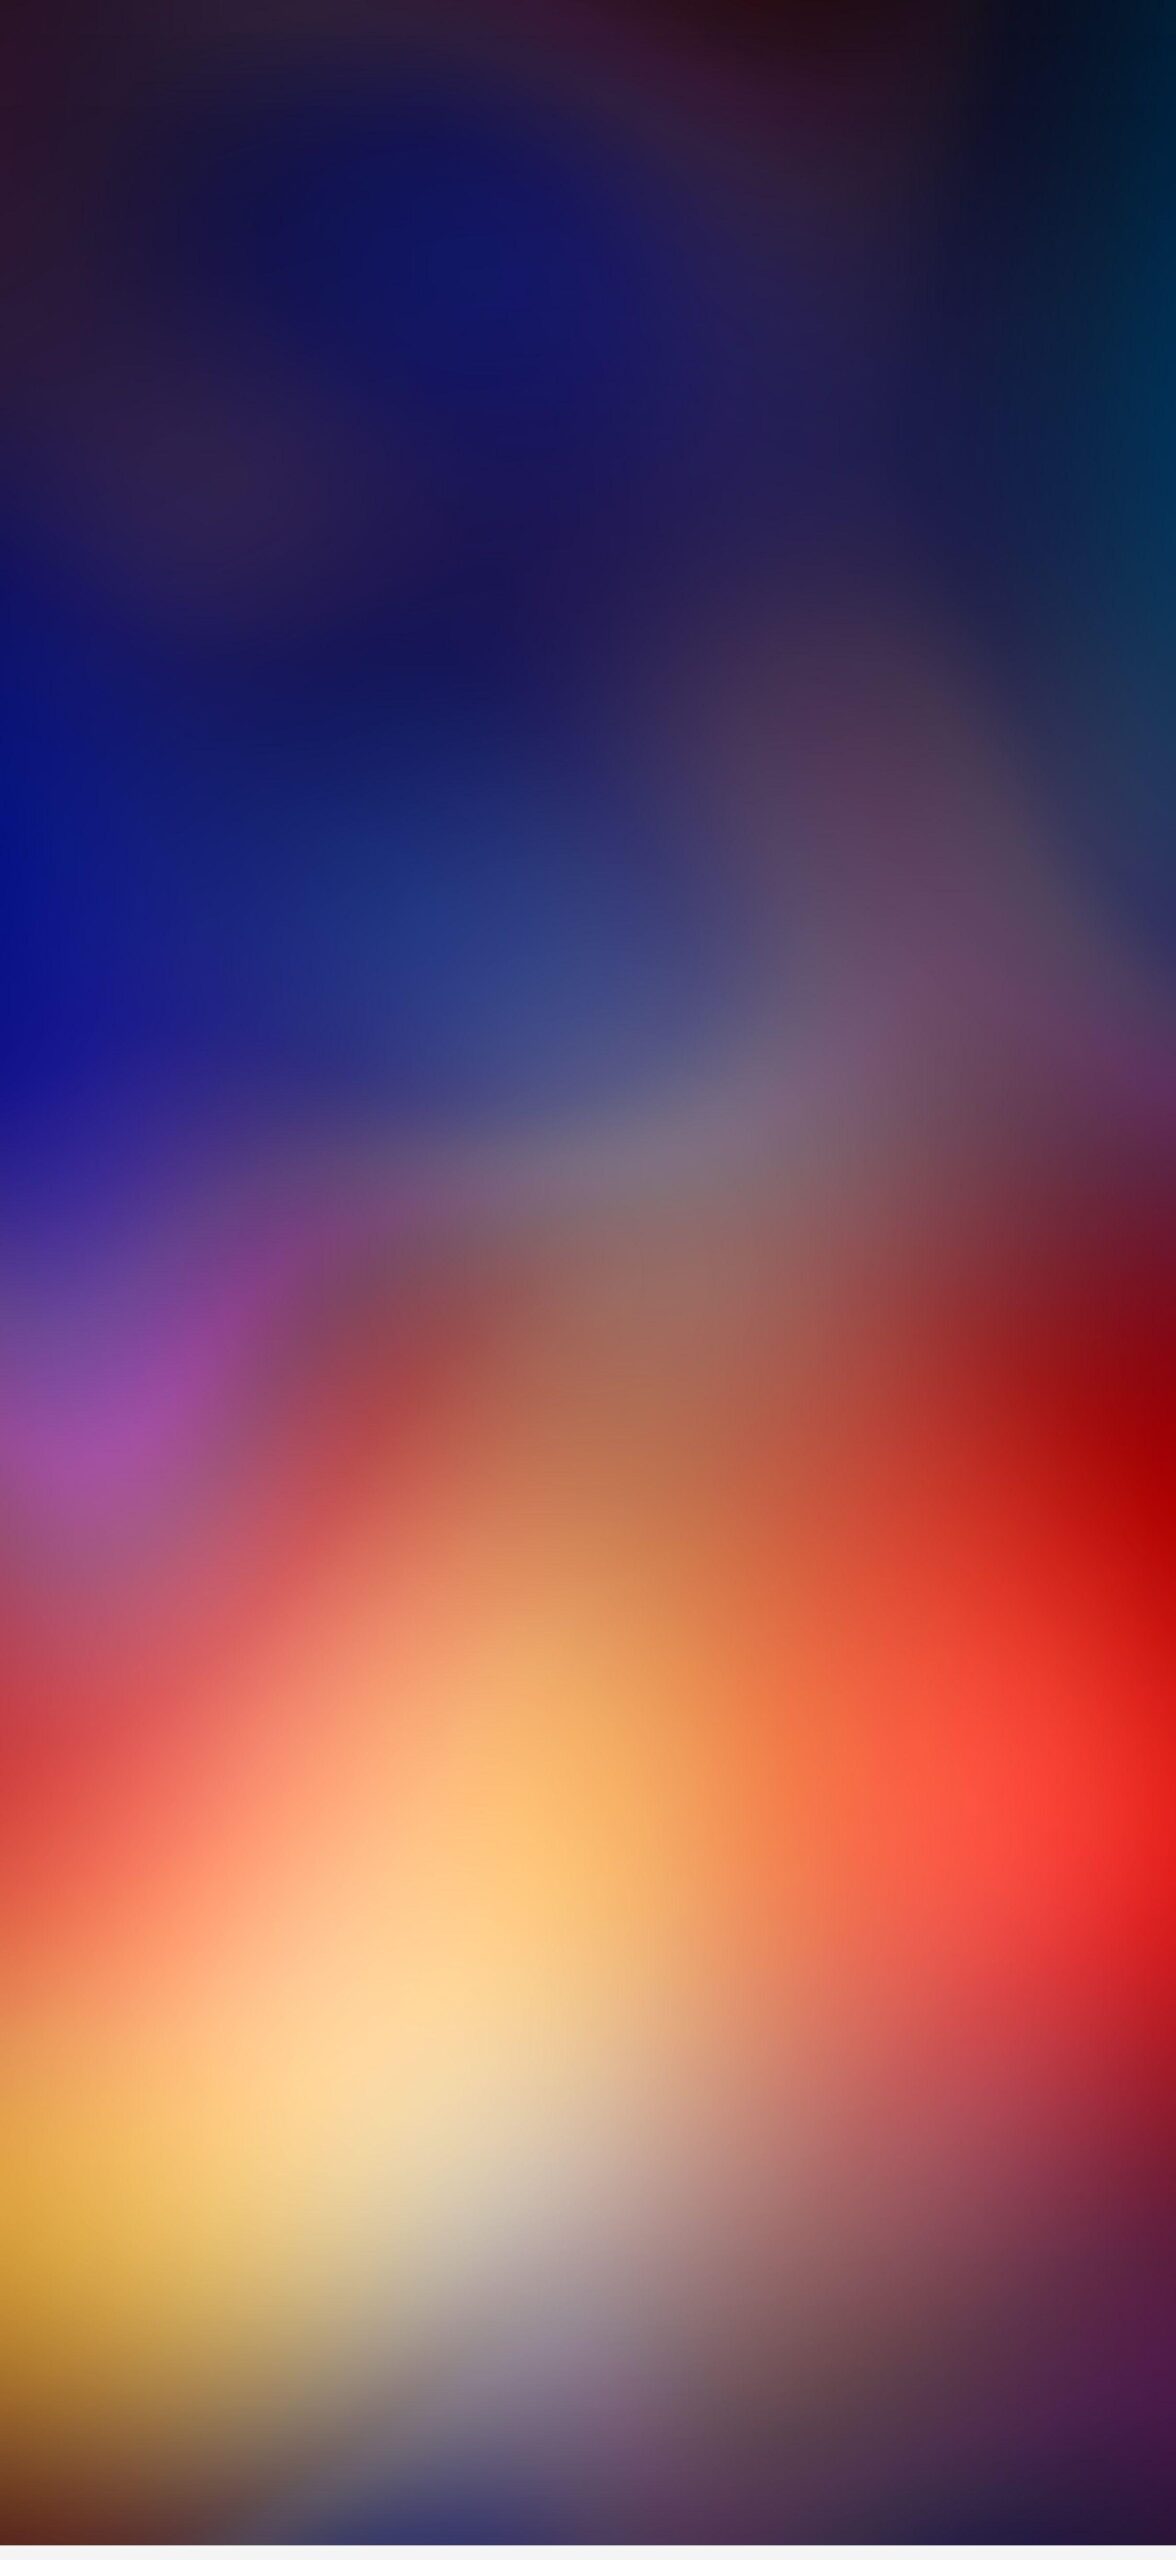 Iphone x wallpapers k hd